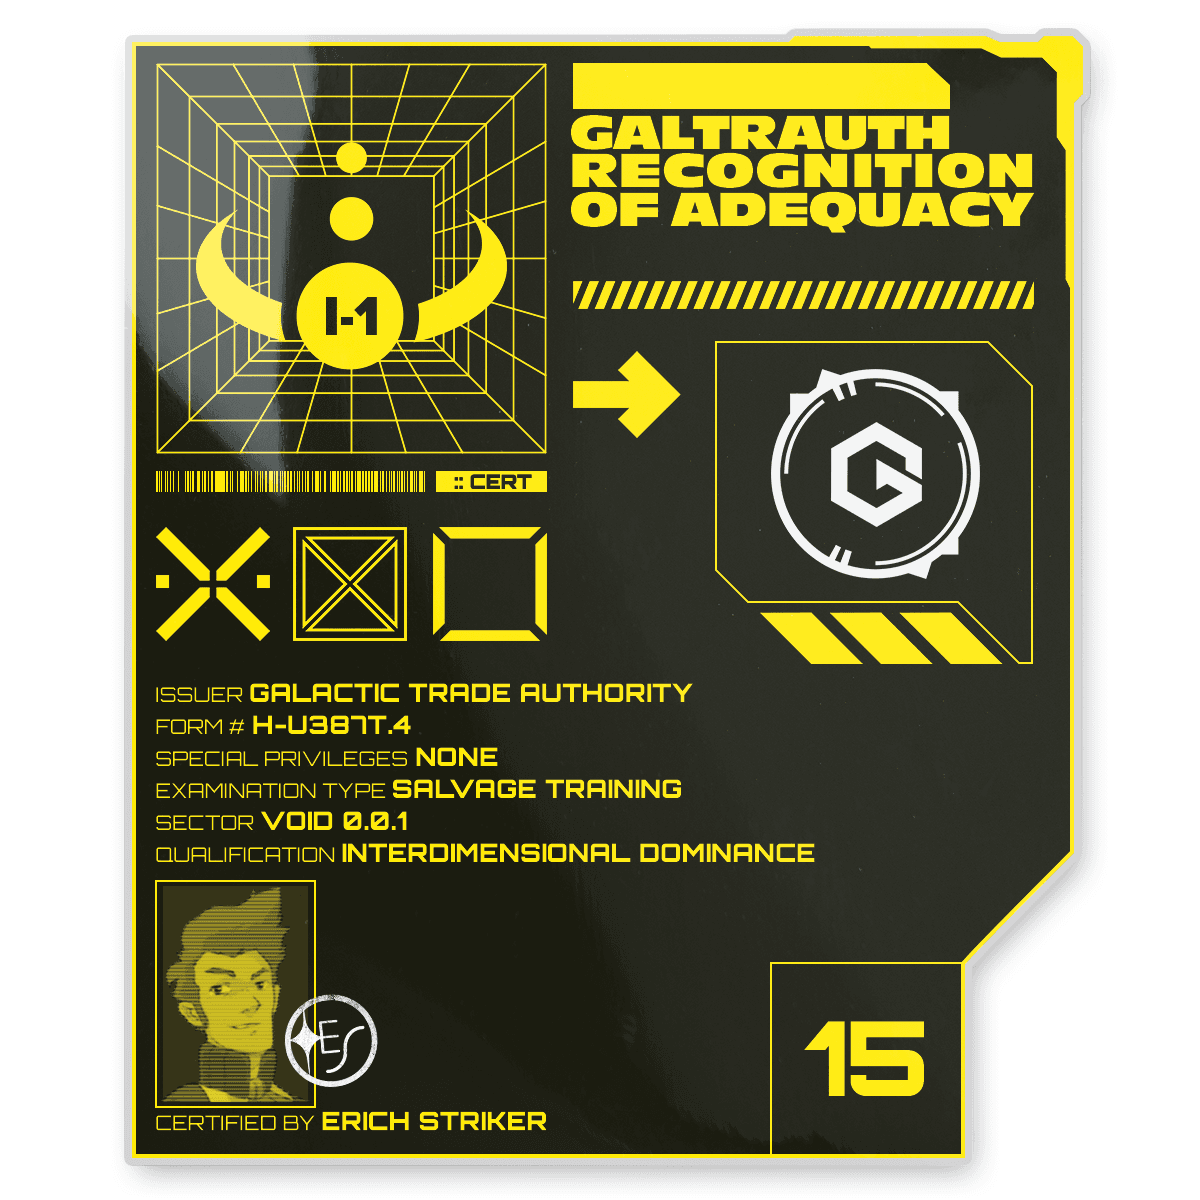 GALTRAUTH Recognition I-1